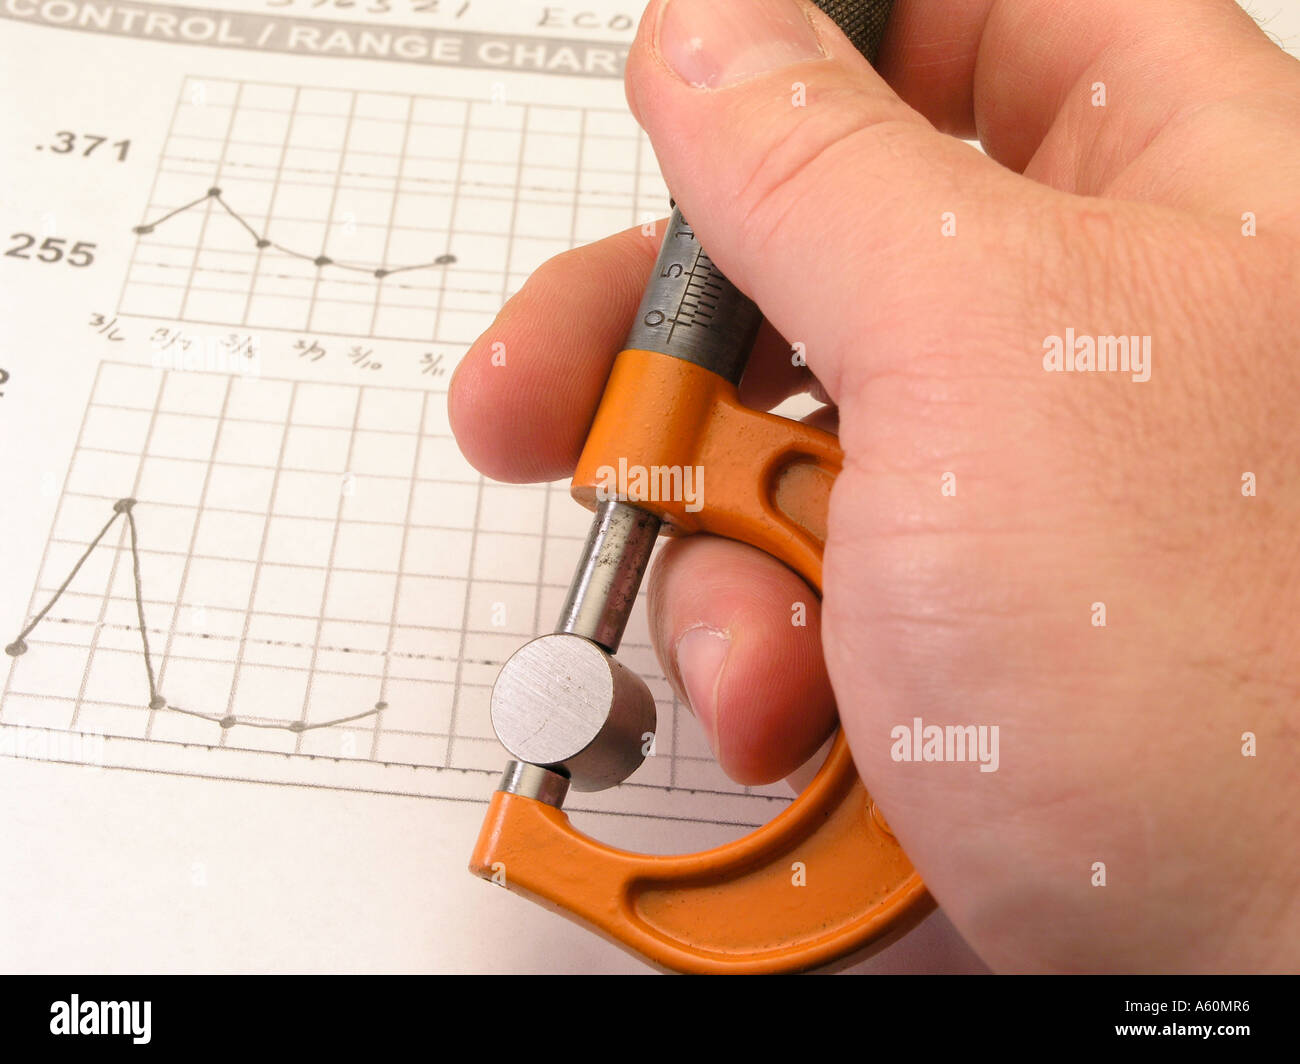 https://c8.alamy.com/comp/A60MR6/micrometer-metric-units-measuring-part-with-spc-chart-in-background-A60MR6.jpg